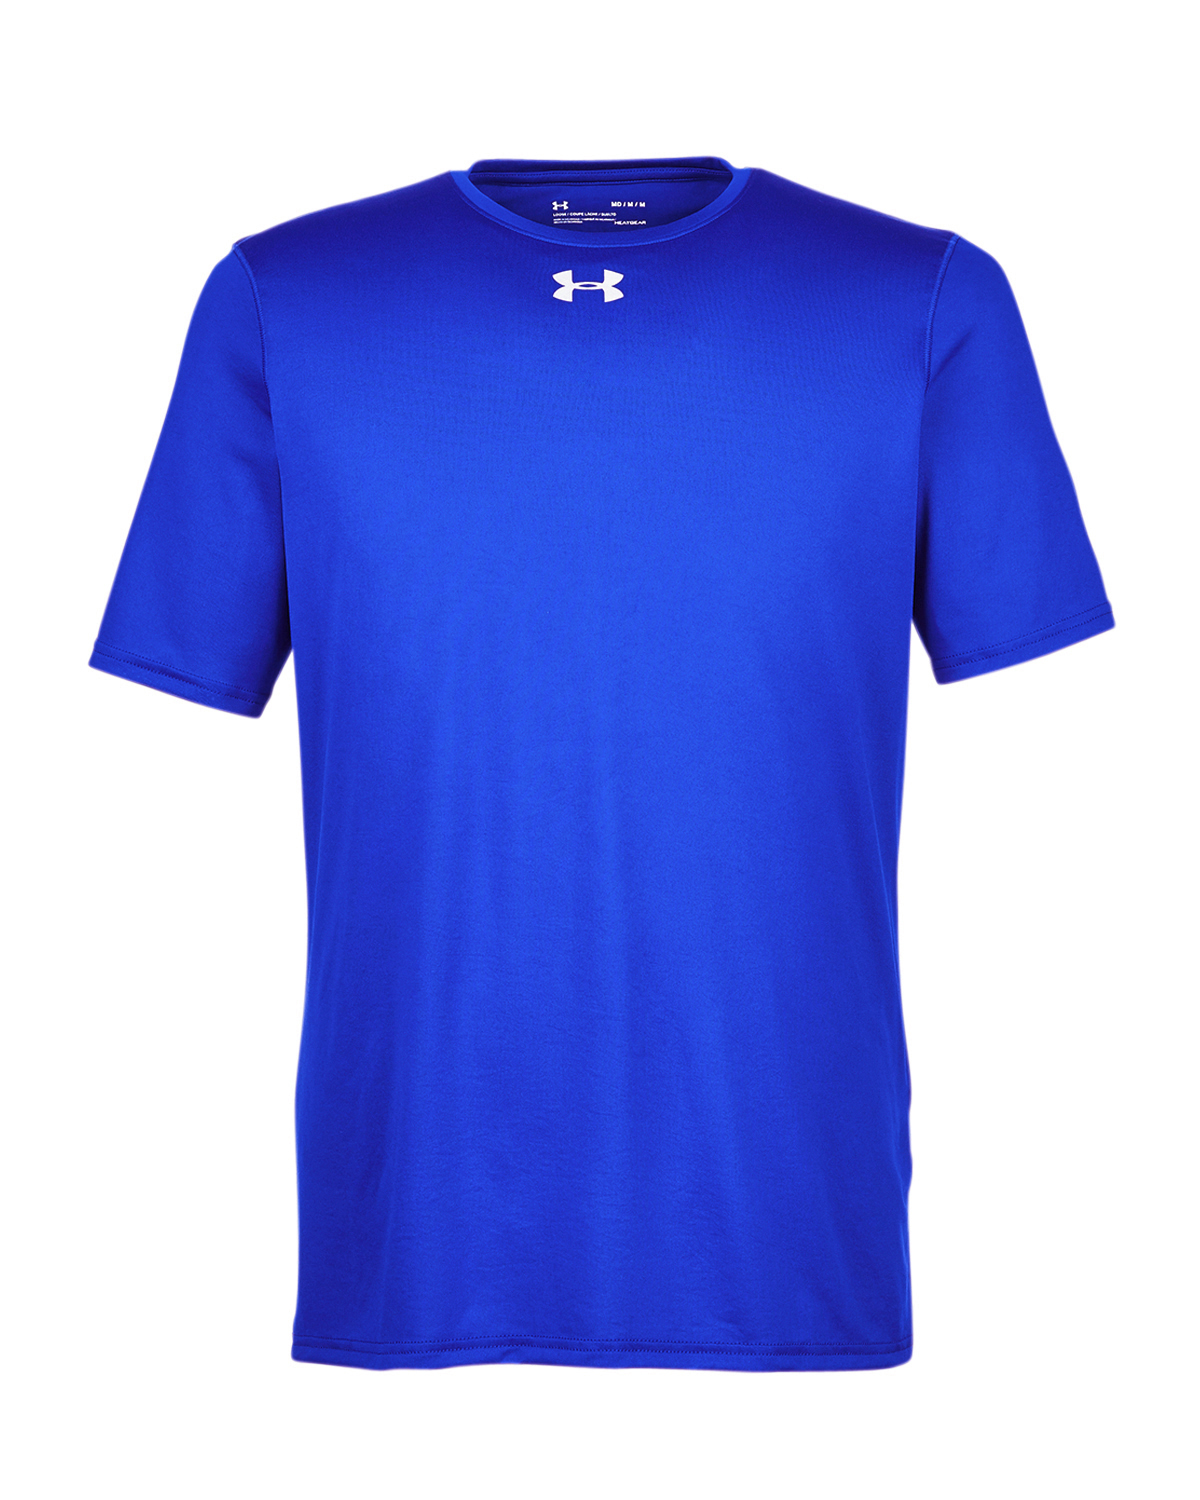 under armour youth shirts